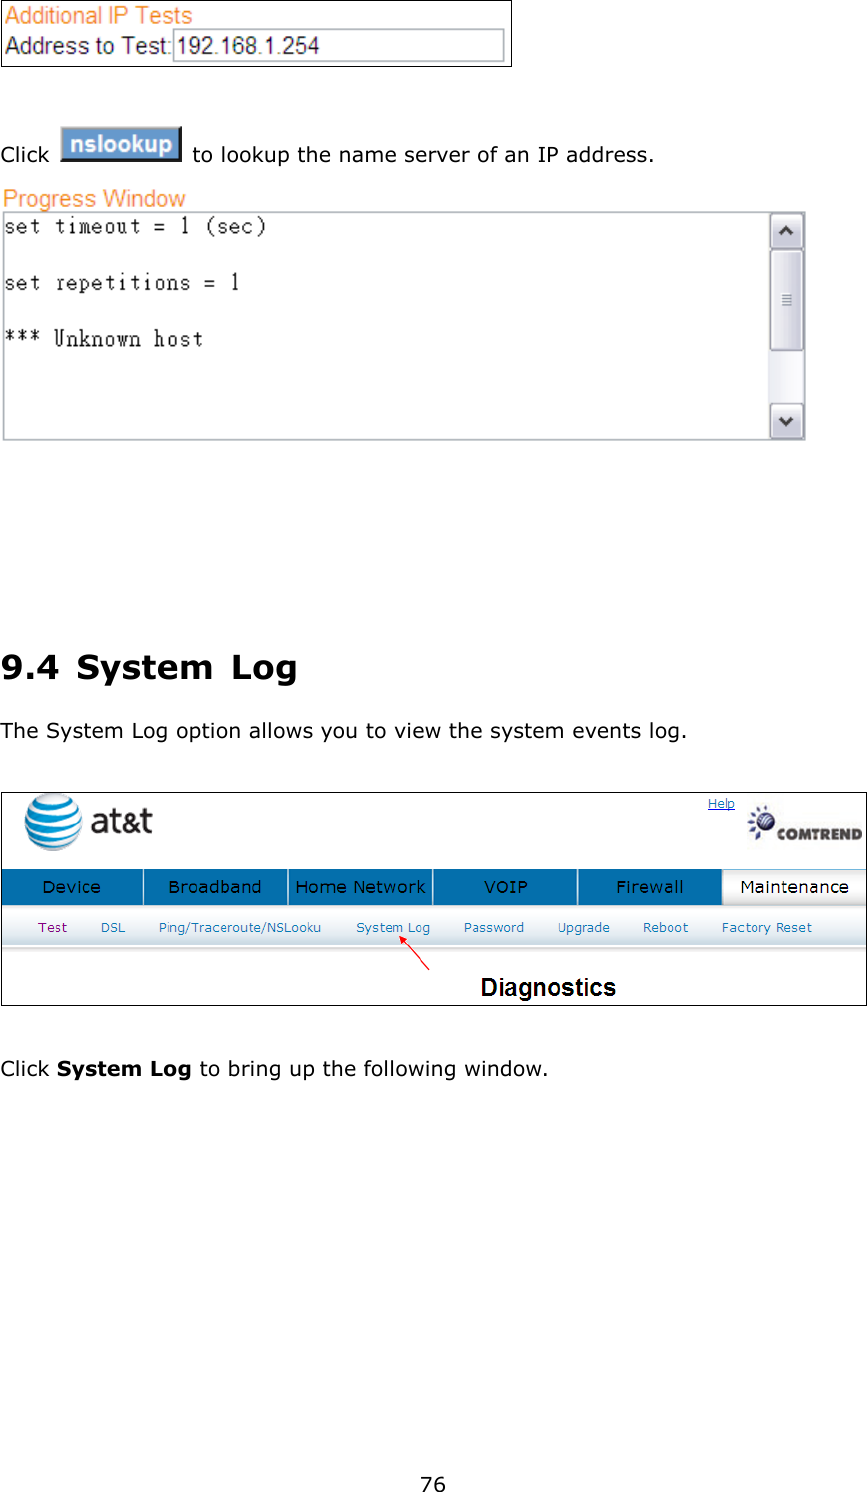 76  Click    to lookup the name server of an IP address.    9.4  System  Log The System Log option allows you to view the system events log.     Click System Log to bring up the following window.  